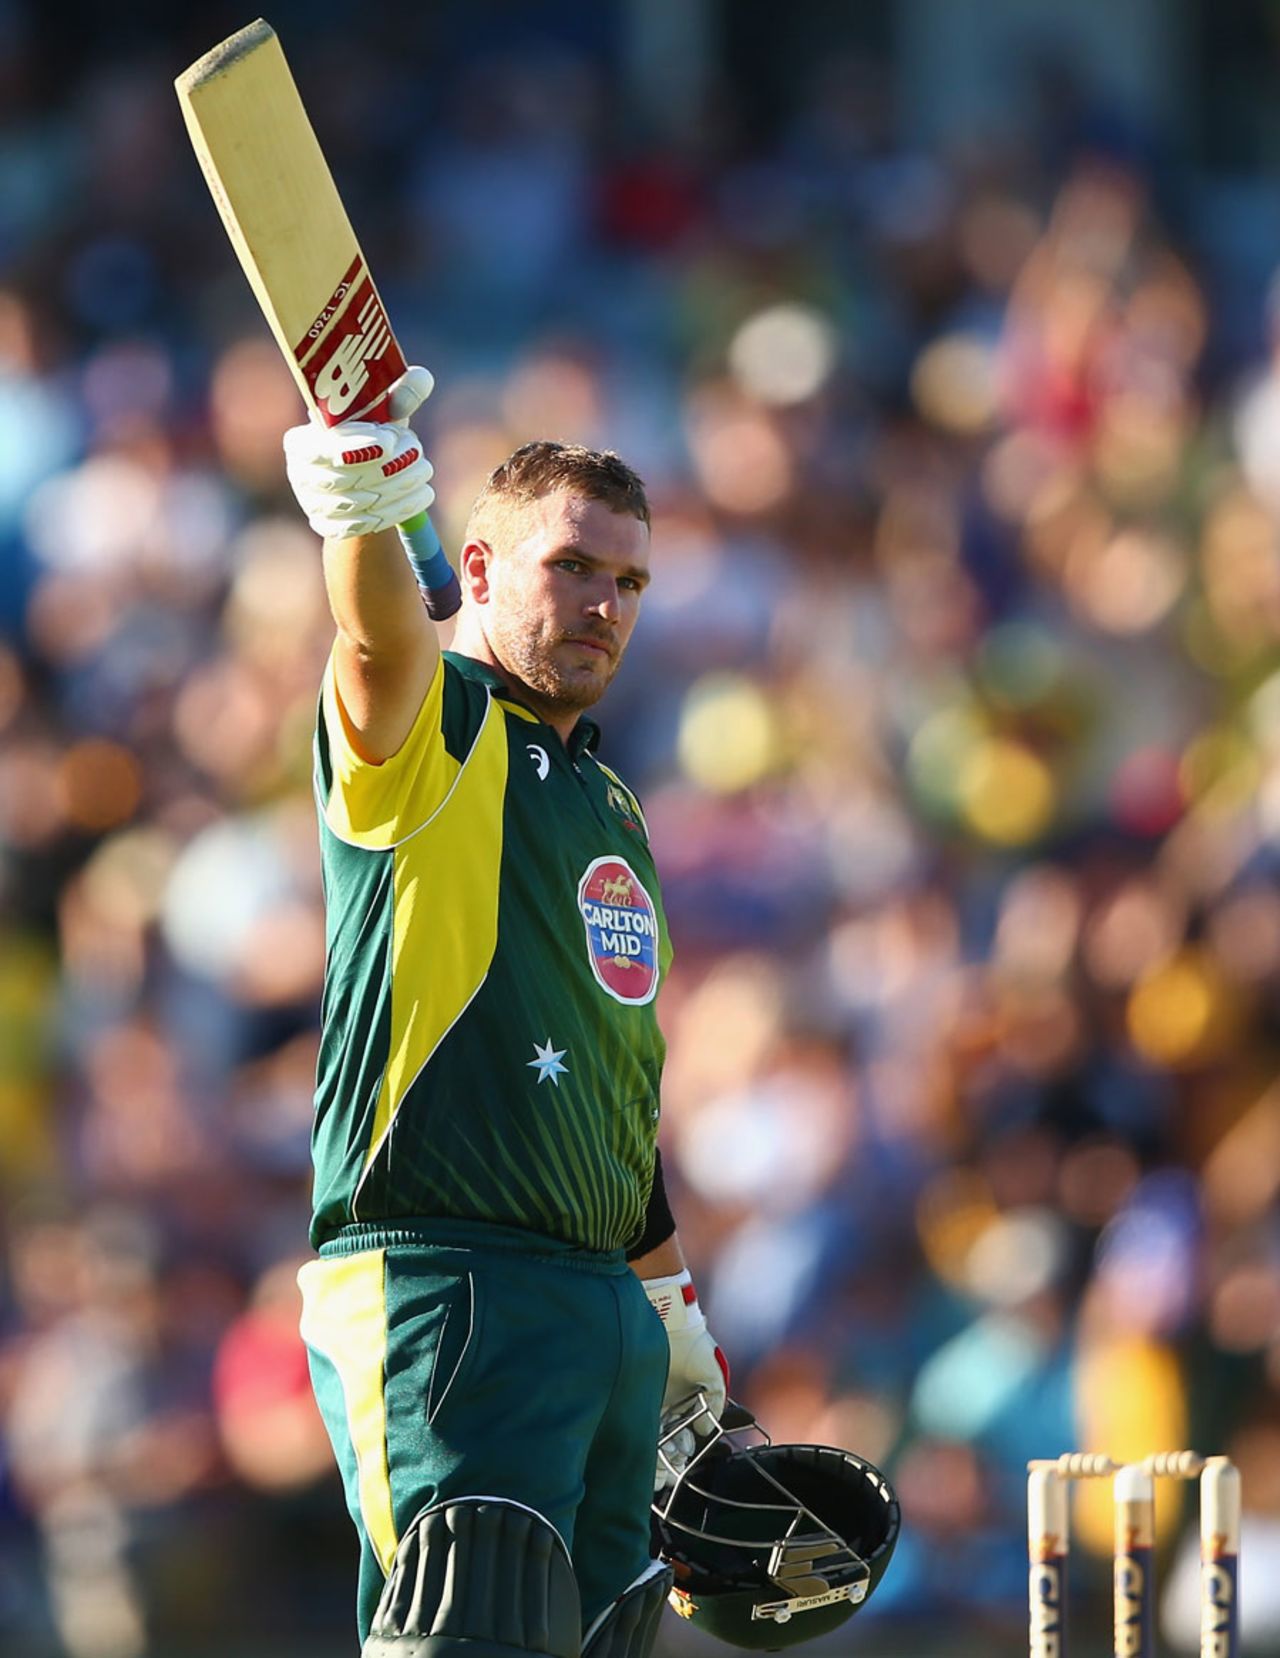 Aaron Finch made his second hundred of the series, Australia v England, 4th ODI, Perth, January 24, 2014